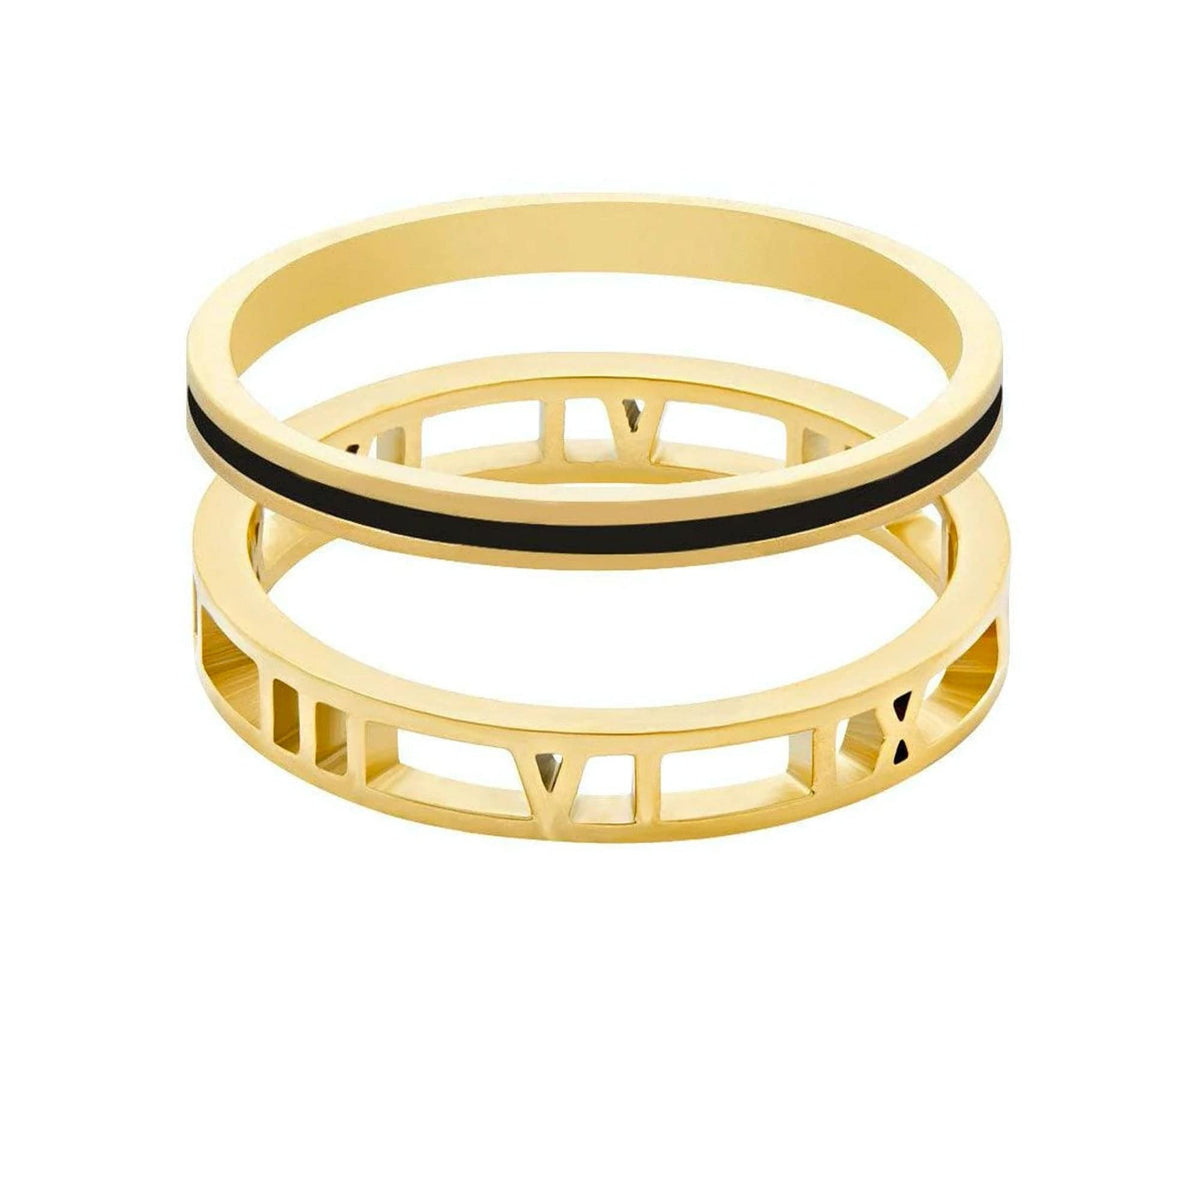 BohoMoon Stainless Steel Madison Ring Pair Gold / US 6 / UK L / EUR 51 (small)